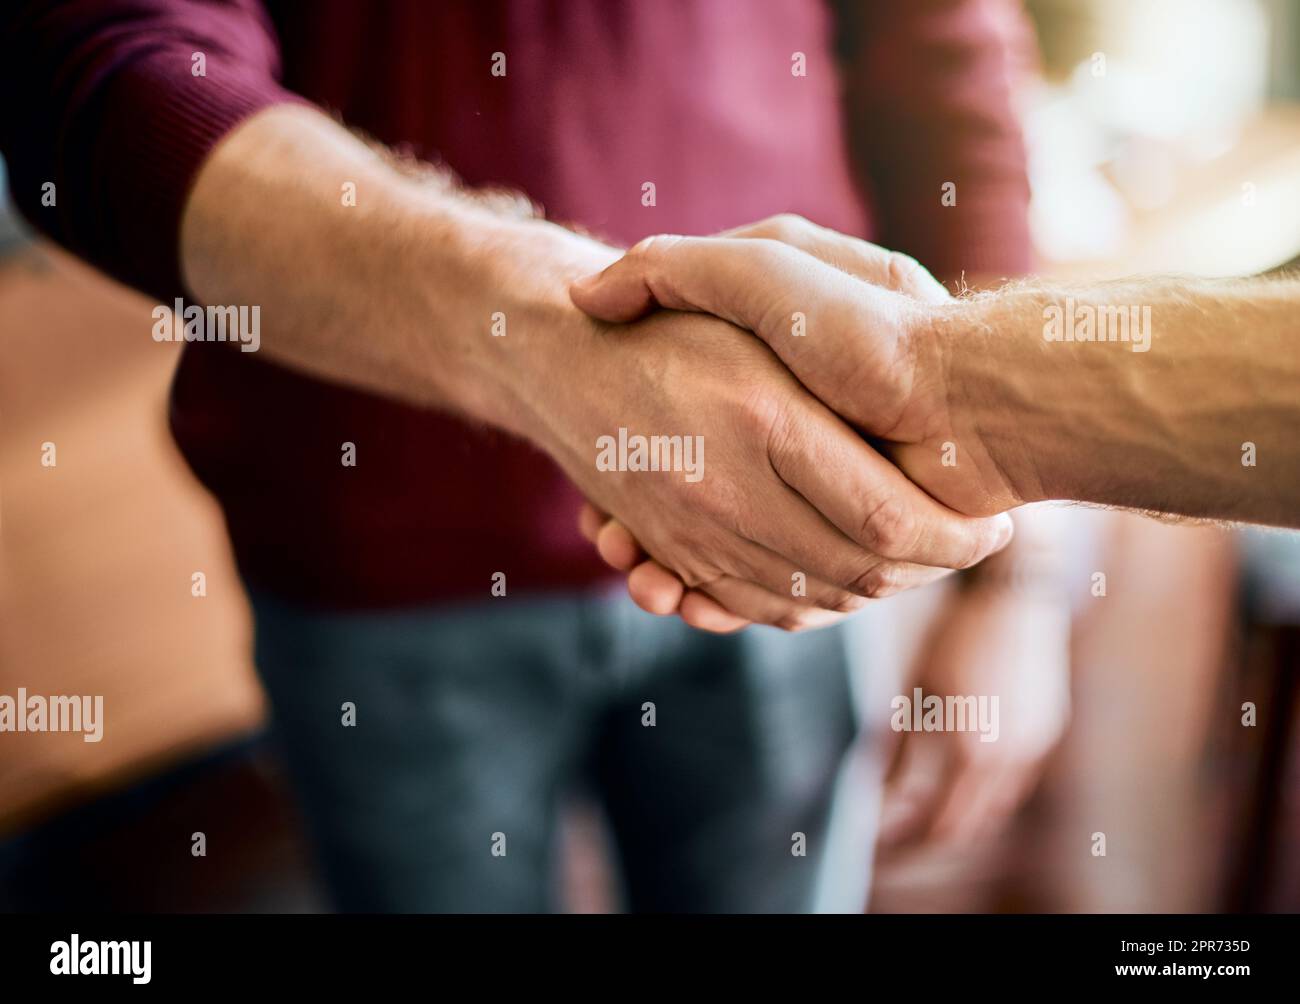 Heres to a successful project. Closeup of two unrecognizable peoples hands greeting and shaking hands inside of a office at work. Stock Photo